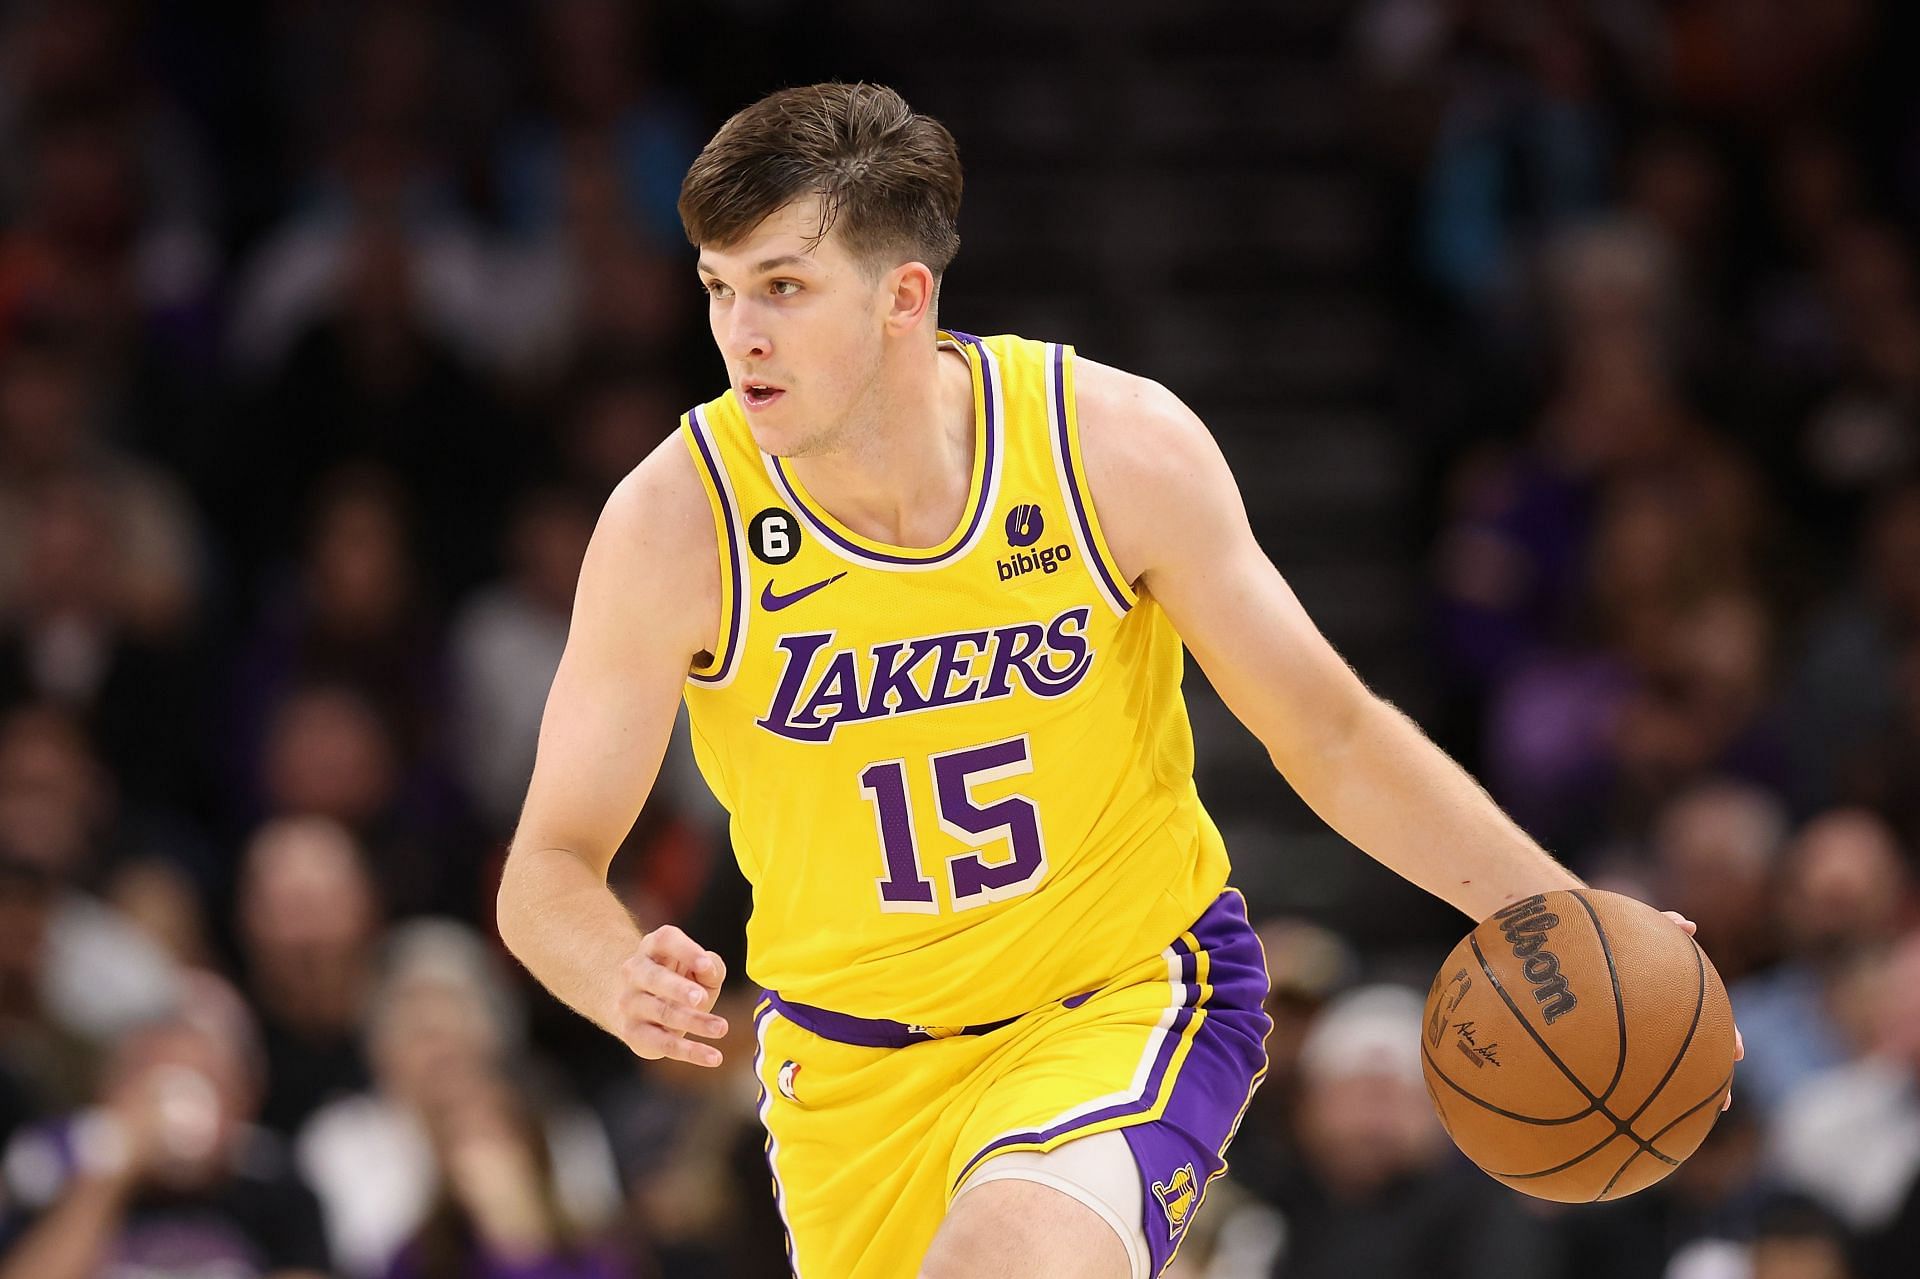 LA Lakers second-year shooting guard Austin Reaves